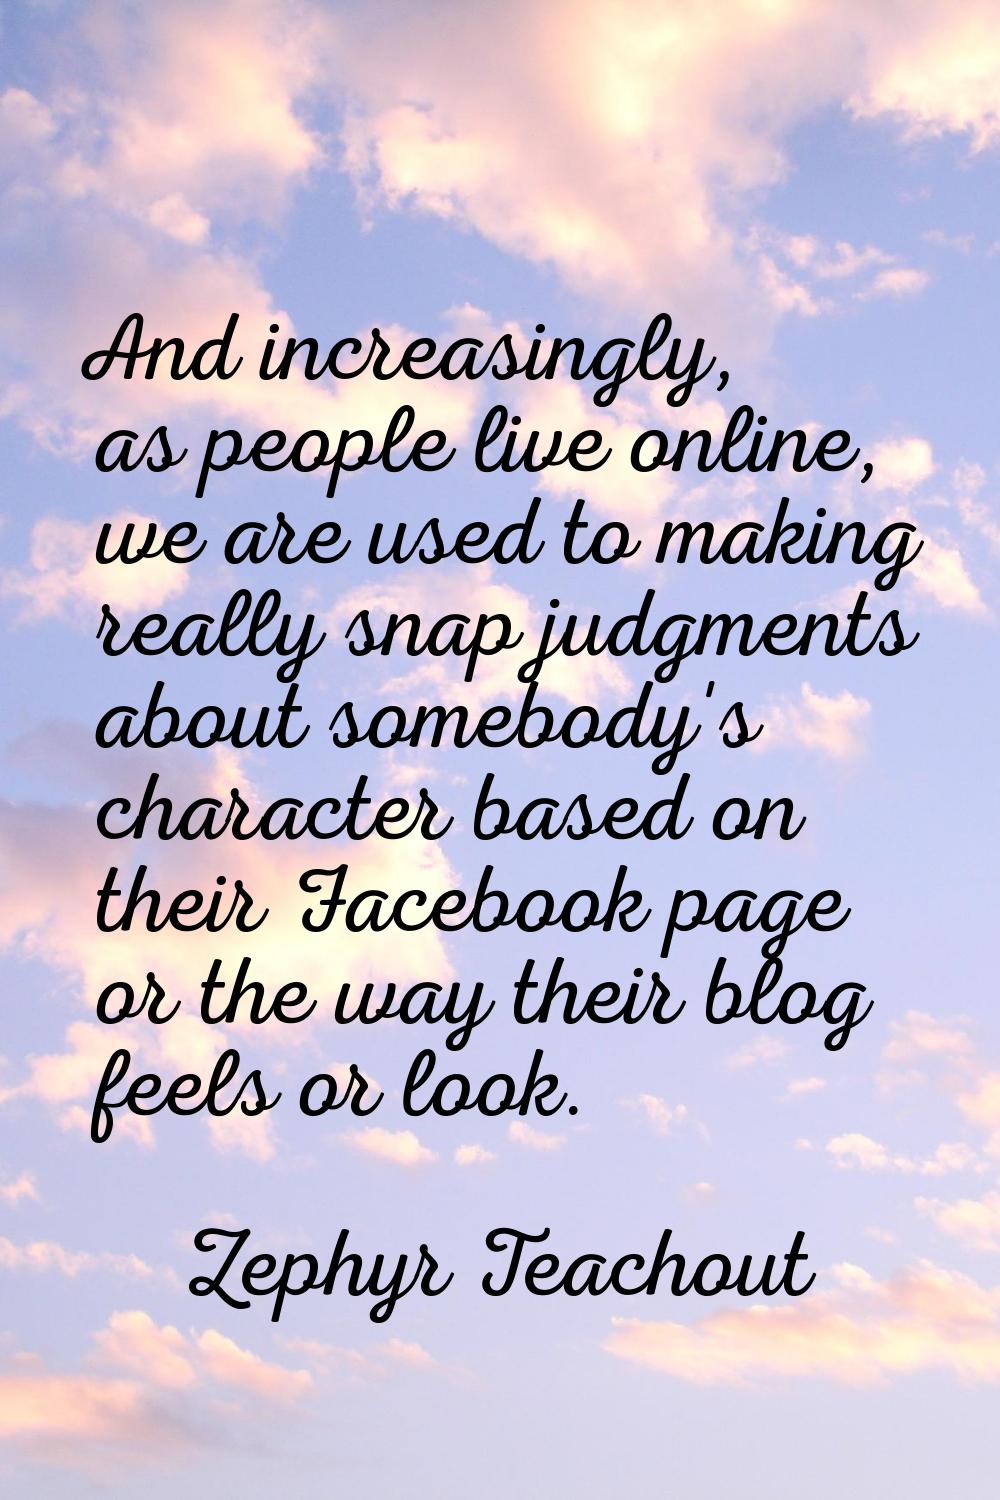 And increasingly, as people live online, we are used to making really snap judgments about somebody